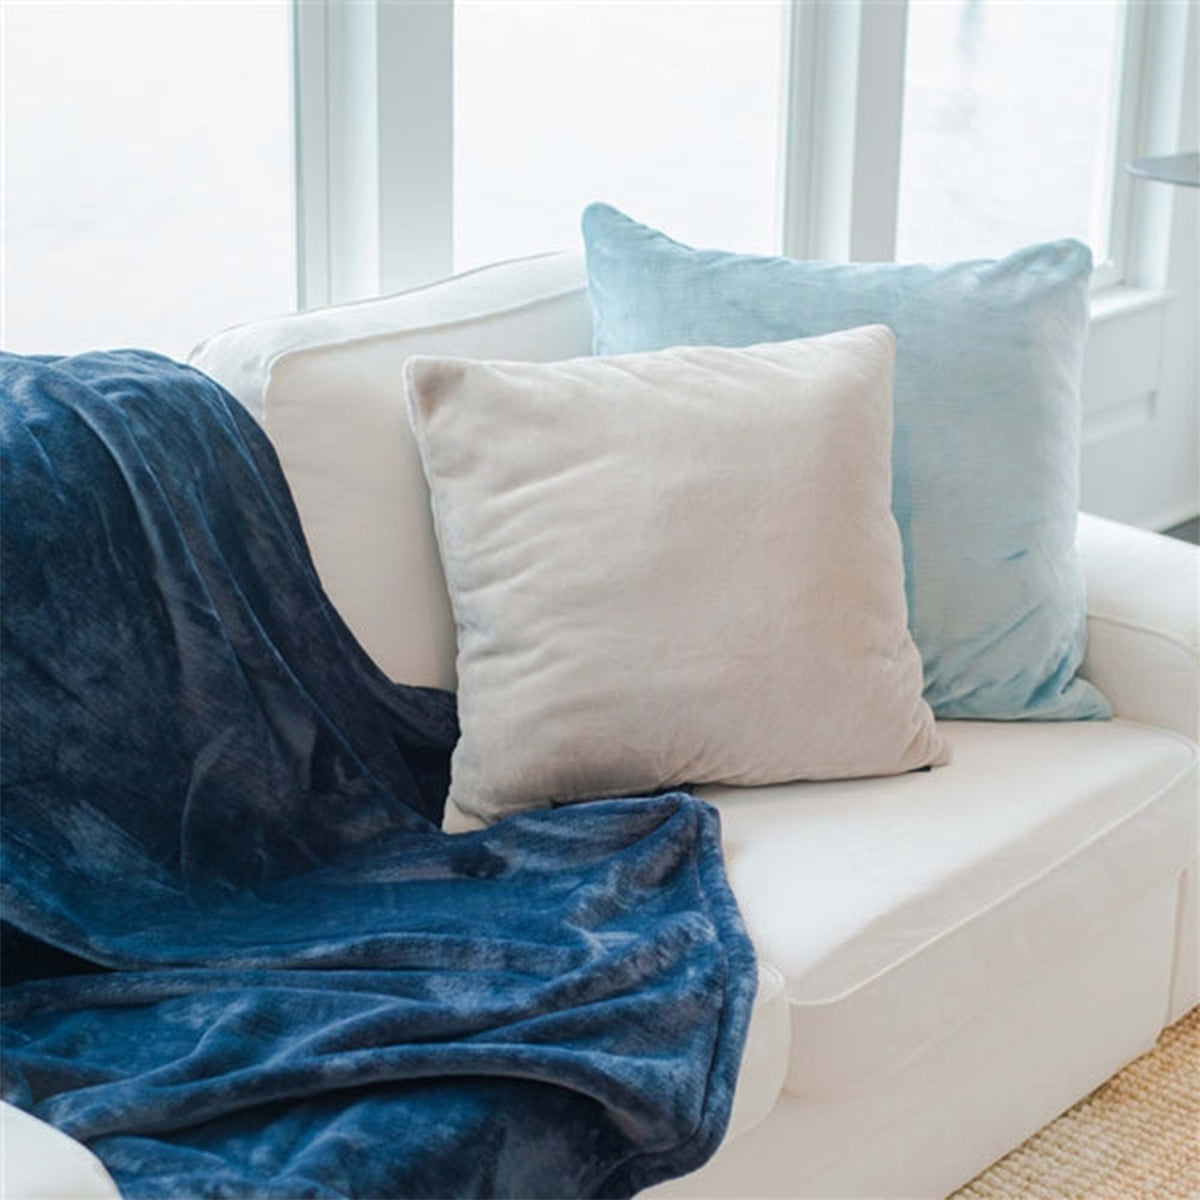 White and blue throw pillows on white couch - Luster Loft - luster loft fleece throw pillows - American Blanket Company